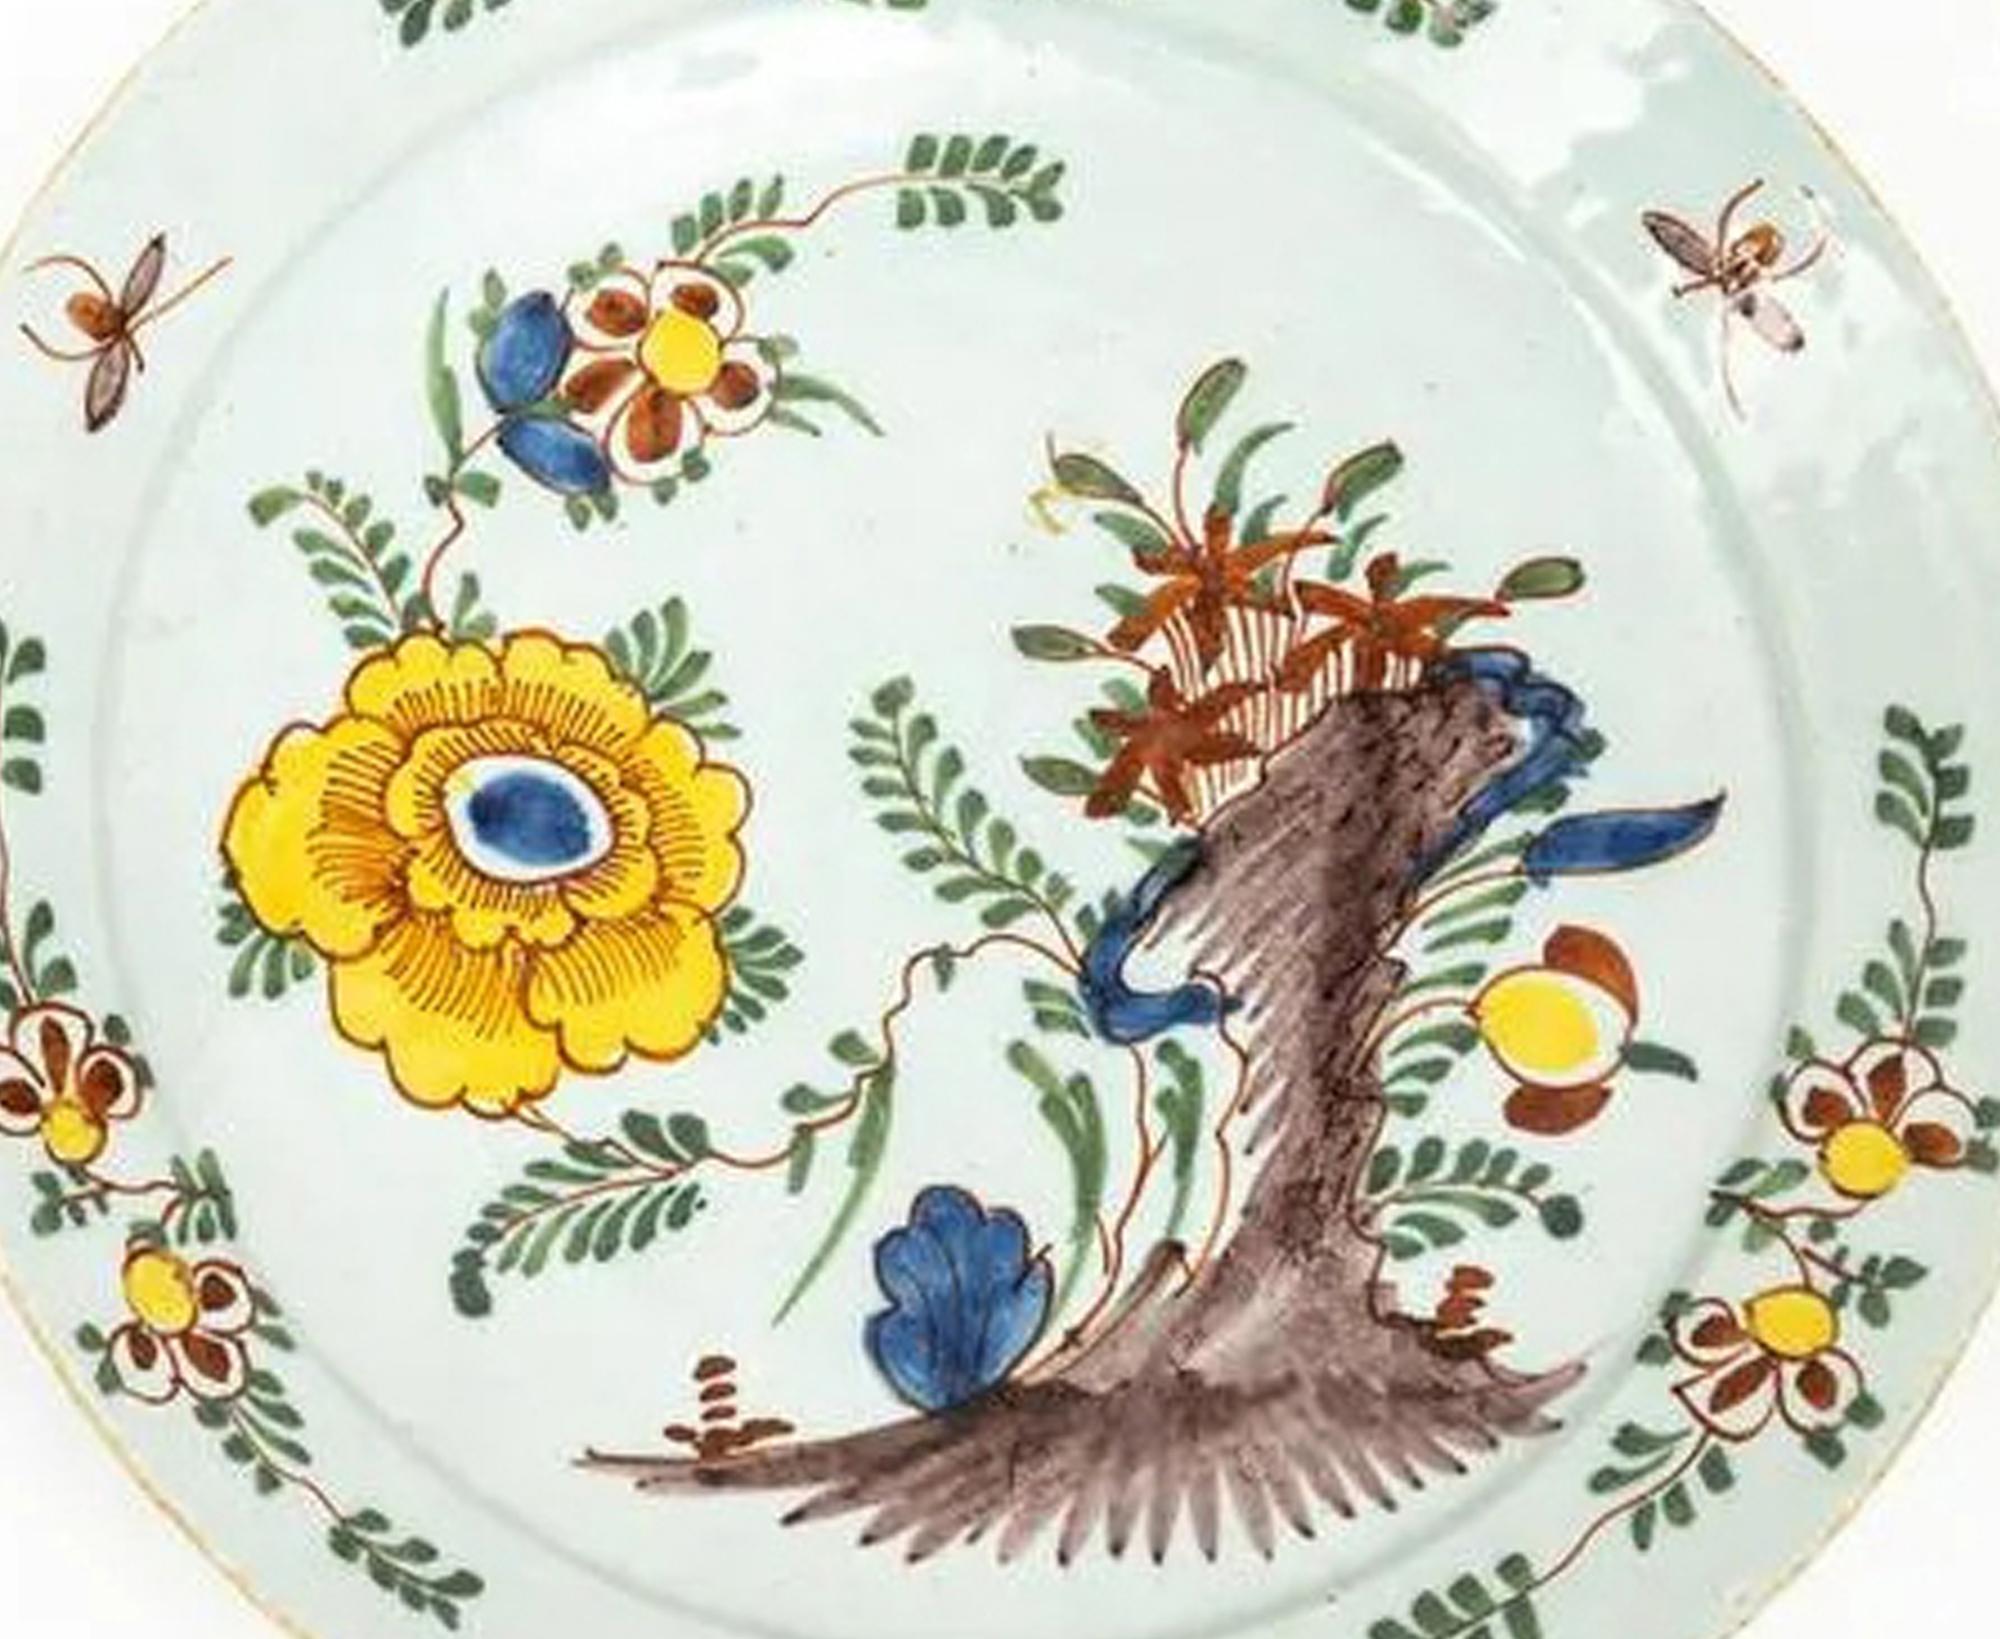 Dutch Delft Polychrome Chinoiserie Plate

The Dutch Delft pancake plate is colorfully painted with a Chinoiserie design of rockwork with flowering plants growing from it including a large yellow leafed flower.  The border with sprigs and